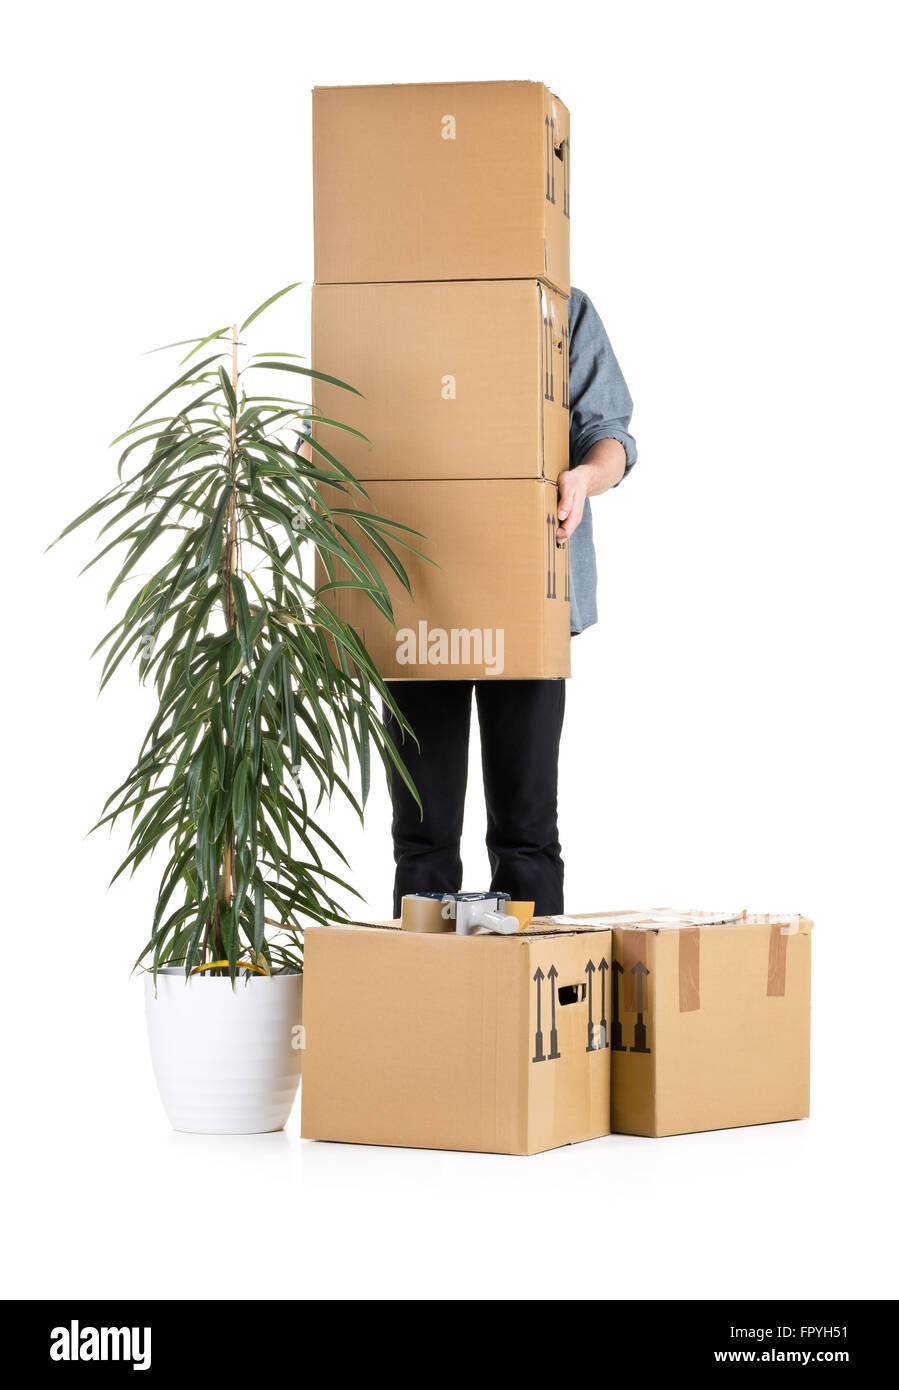 Man lifting moving carton boxes with plant over white background Stock Photo